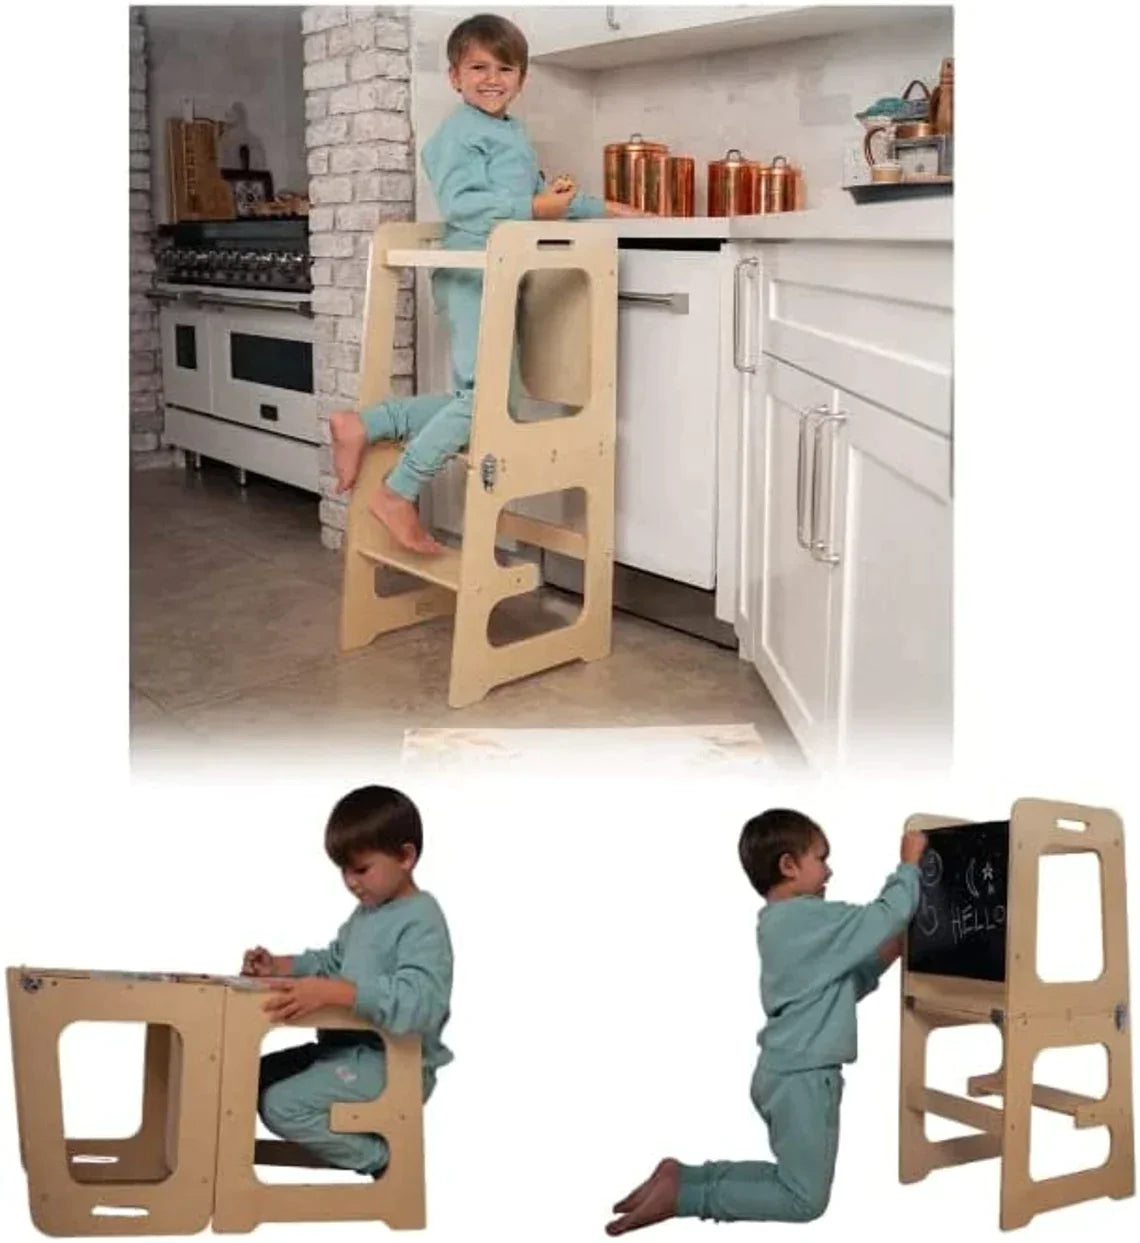 4 in 1 Kitchen Tower, Desk, Step Stool and Chalkboard by Avenlur